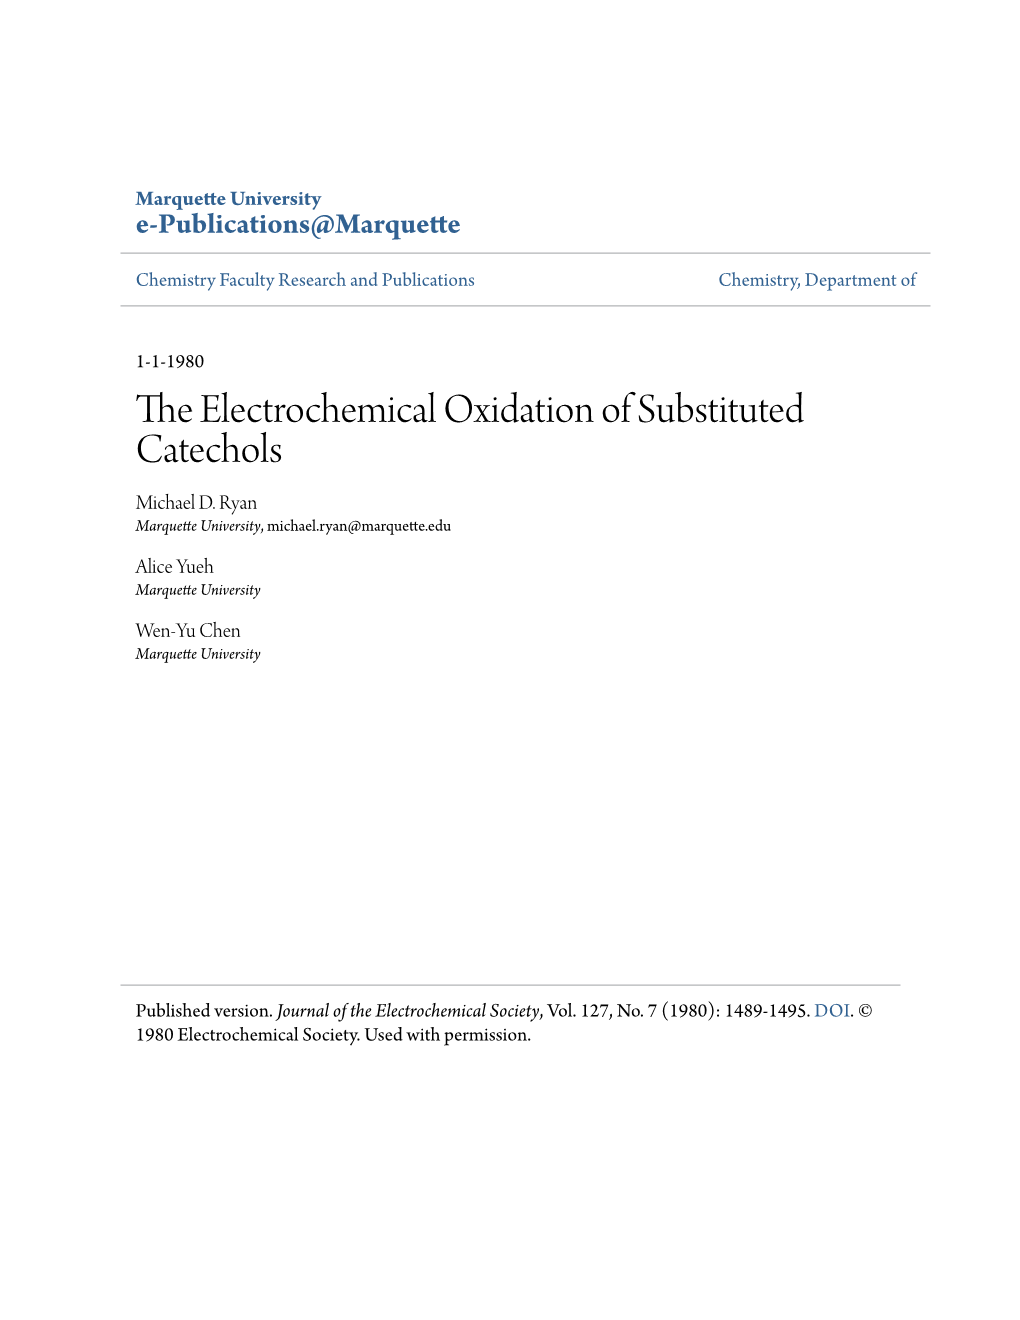 The Electrochemical Oxidation of Substituted Catechols